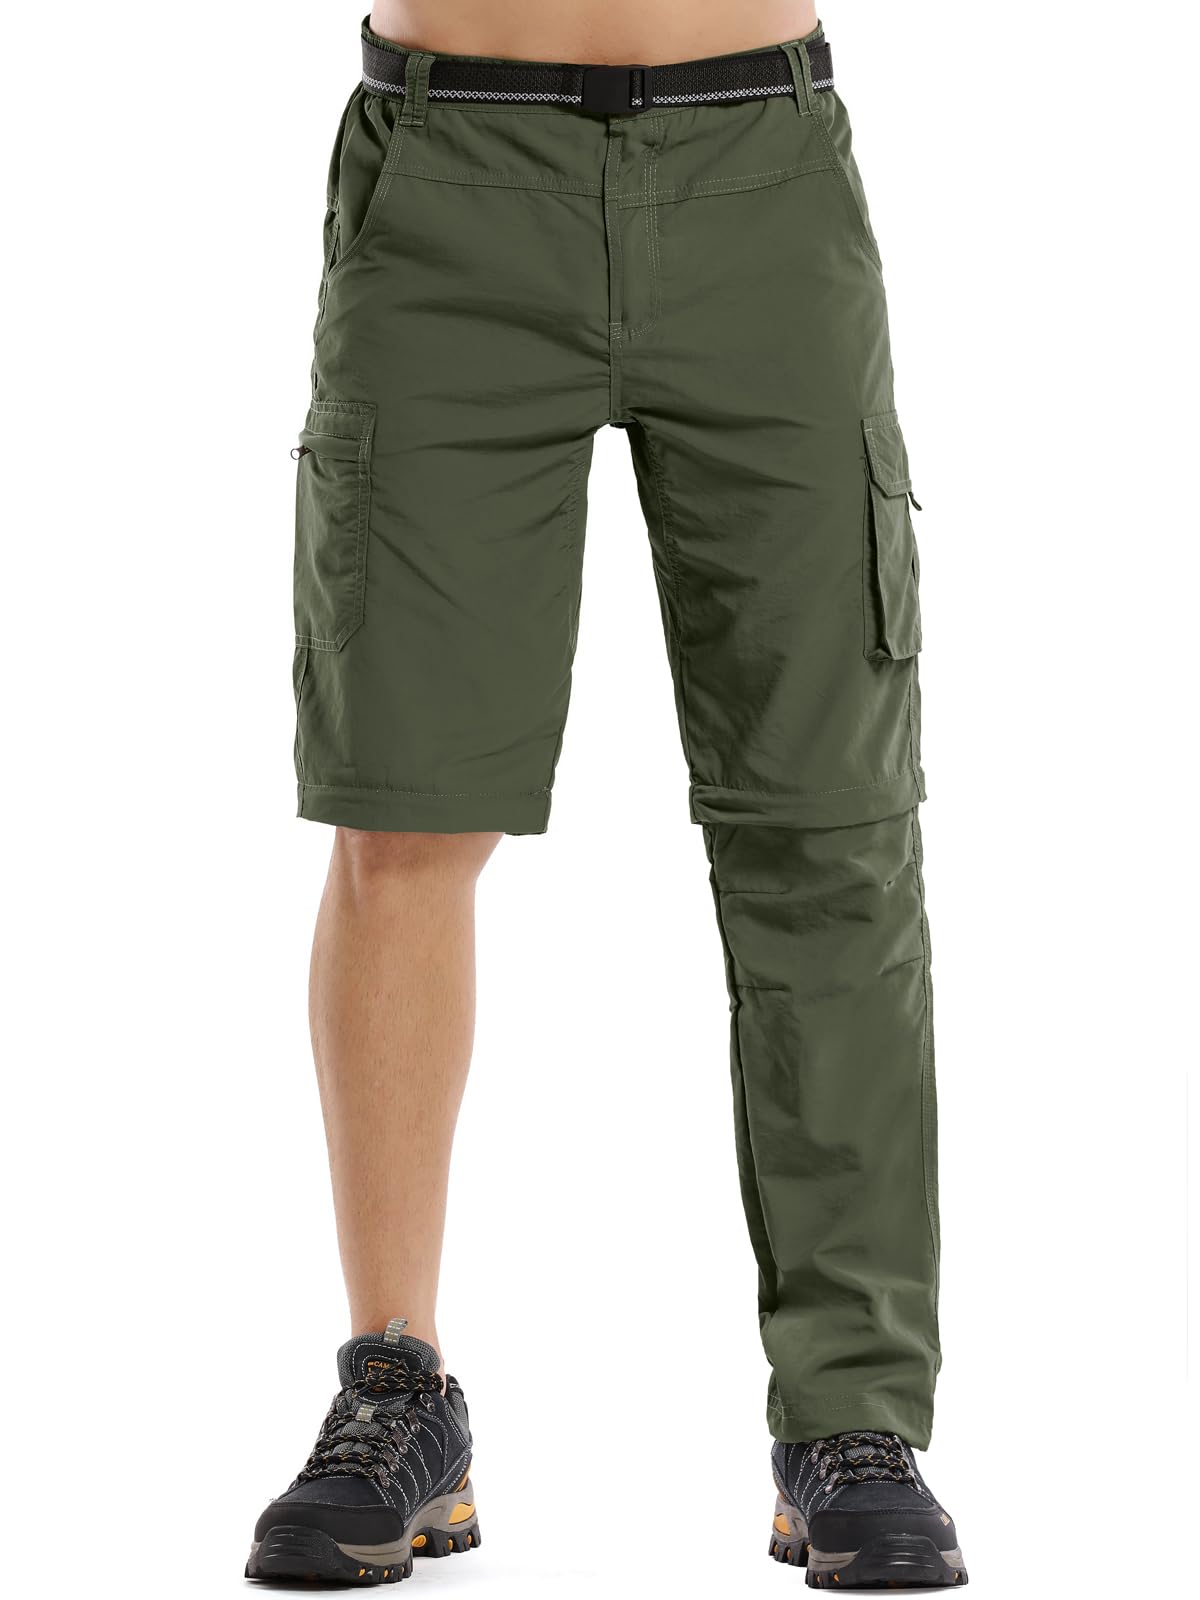 linlon Men's Outdoor Quick Dry Convertible Lightweight Hiking Fishing Zip Off Cargo Work Pants Trousers,Army Green,34